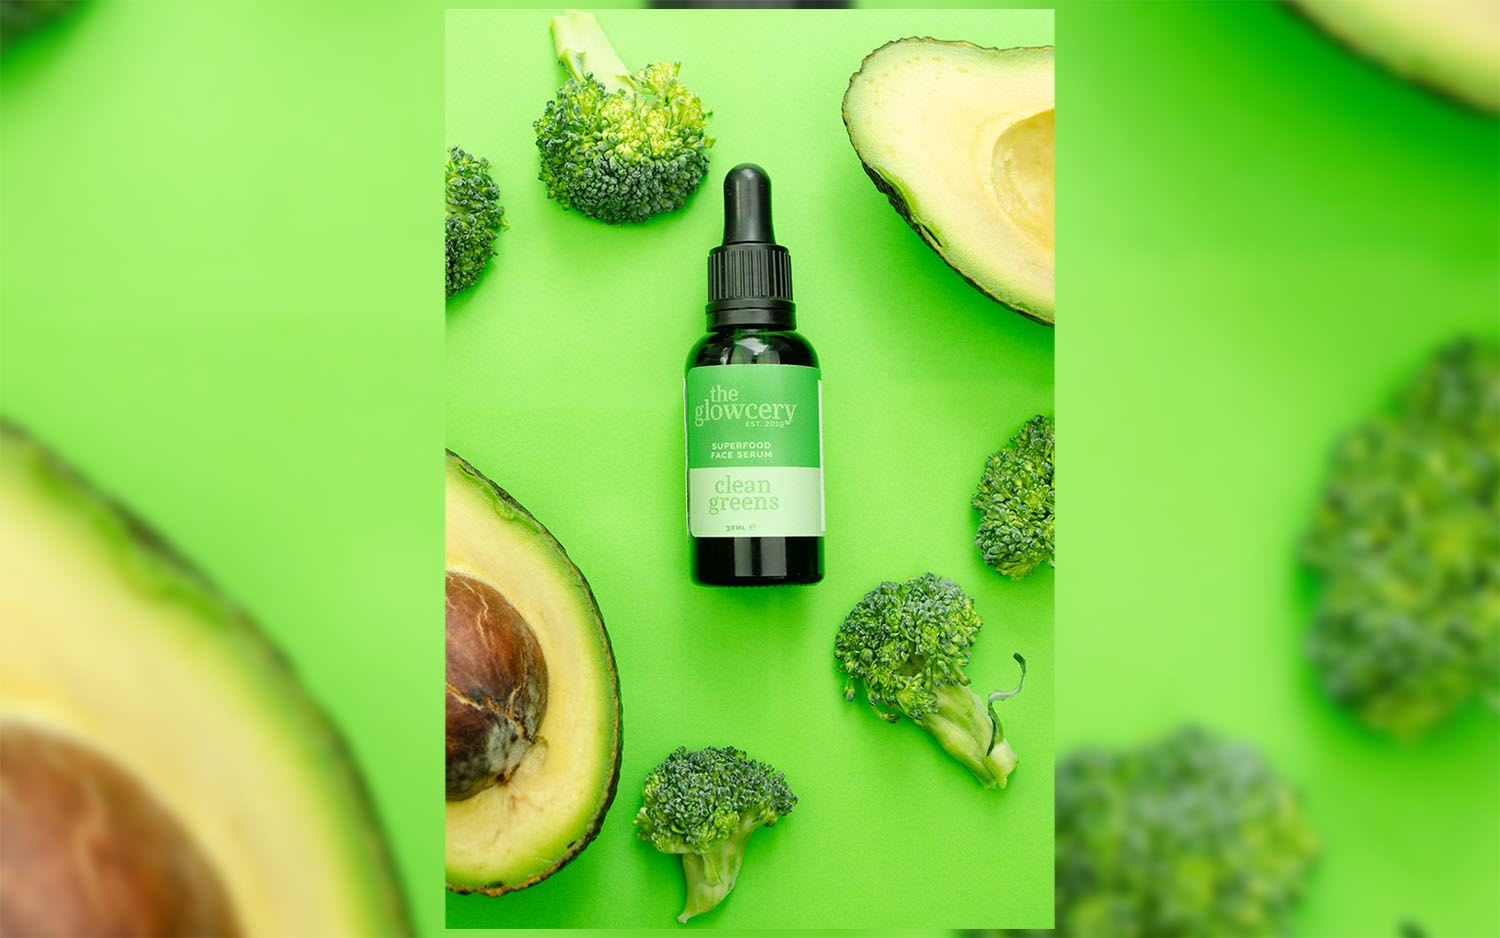 A bottle of The Glowcery's superfood serum on a green background surrounded by broccoli and avocado